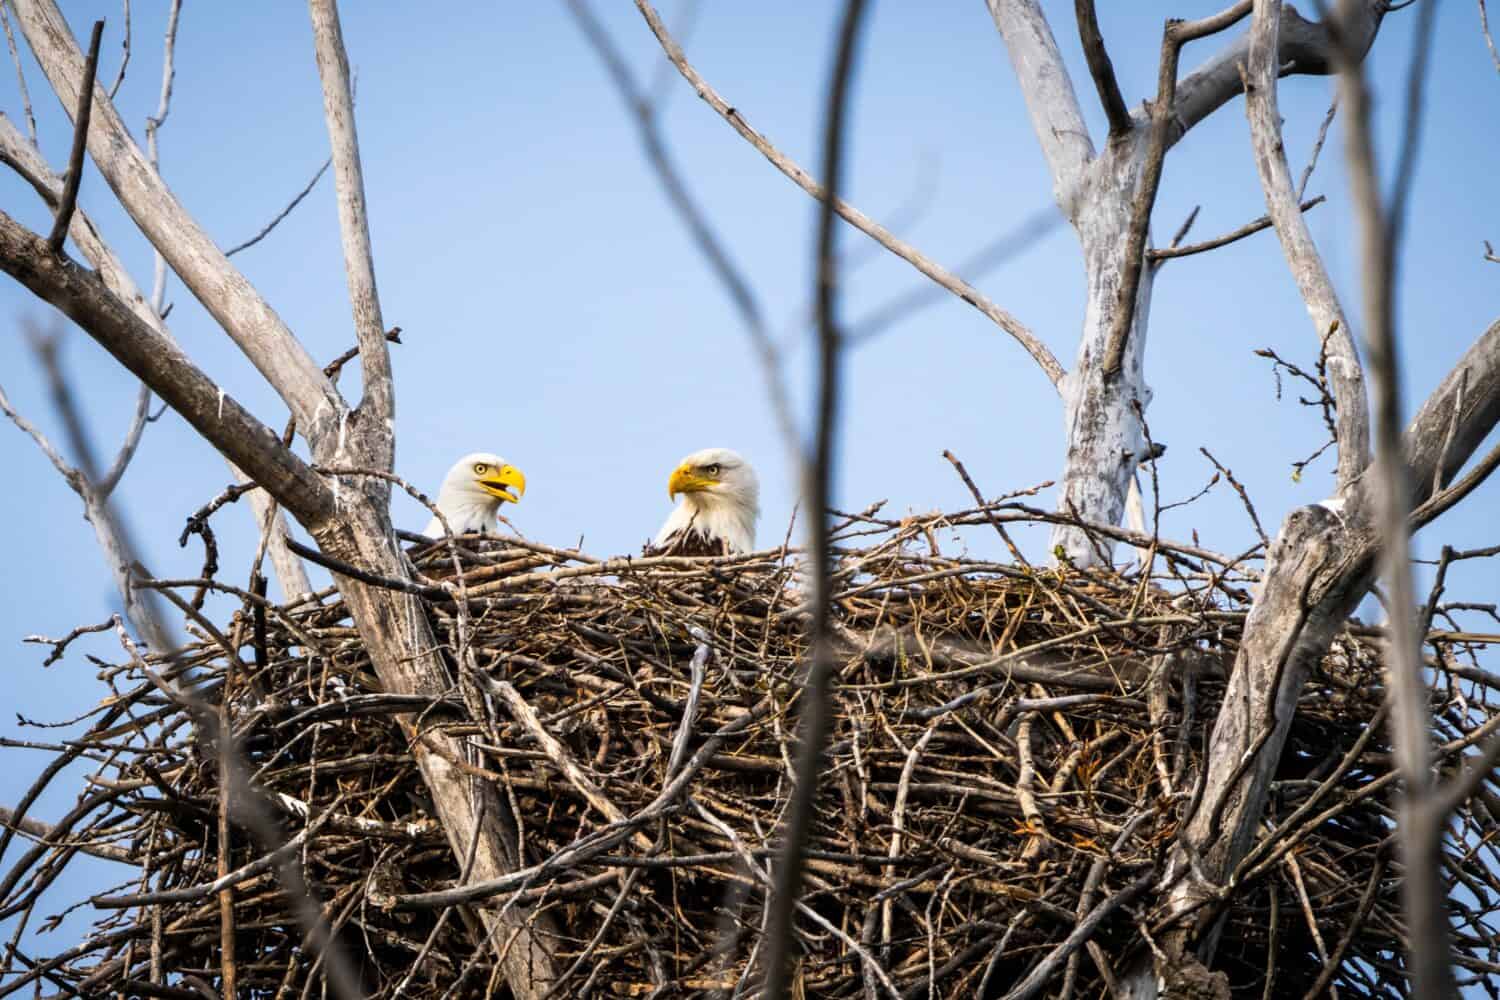 Bald Eagles attending their nest along the shore of the St. Lawrence River.